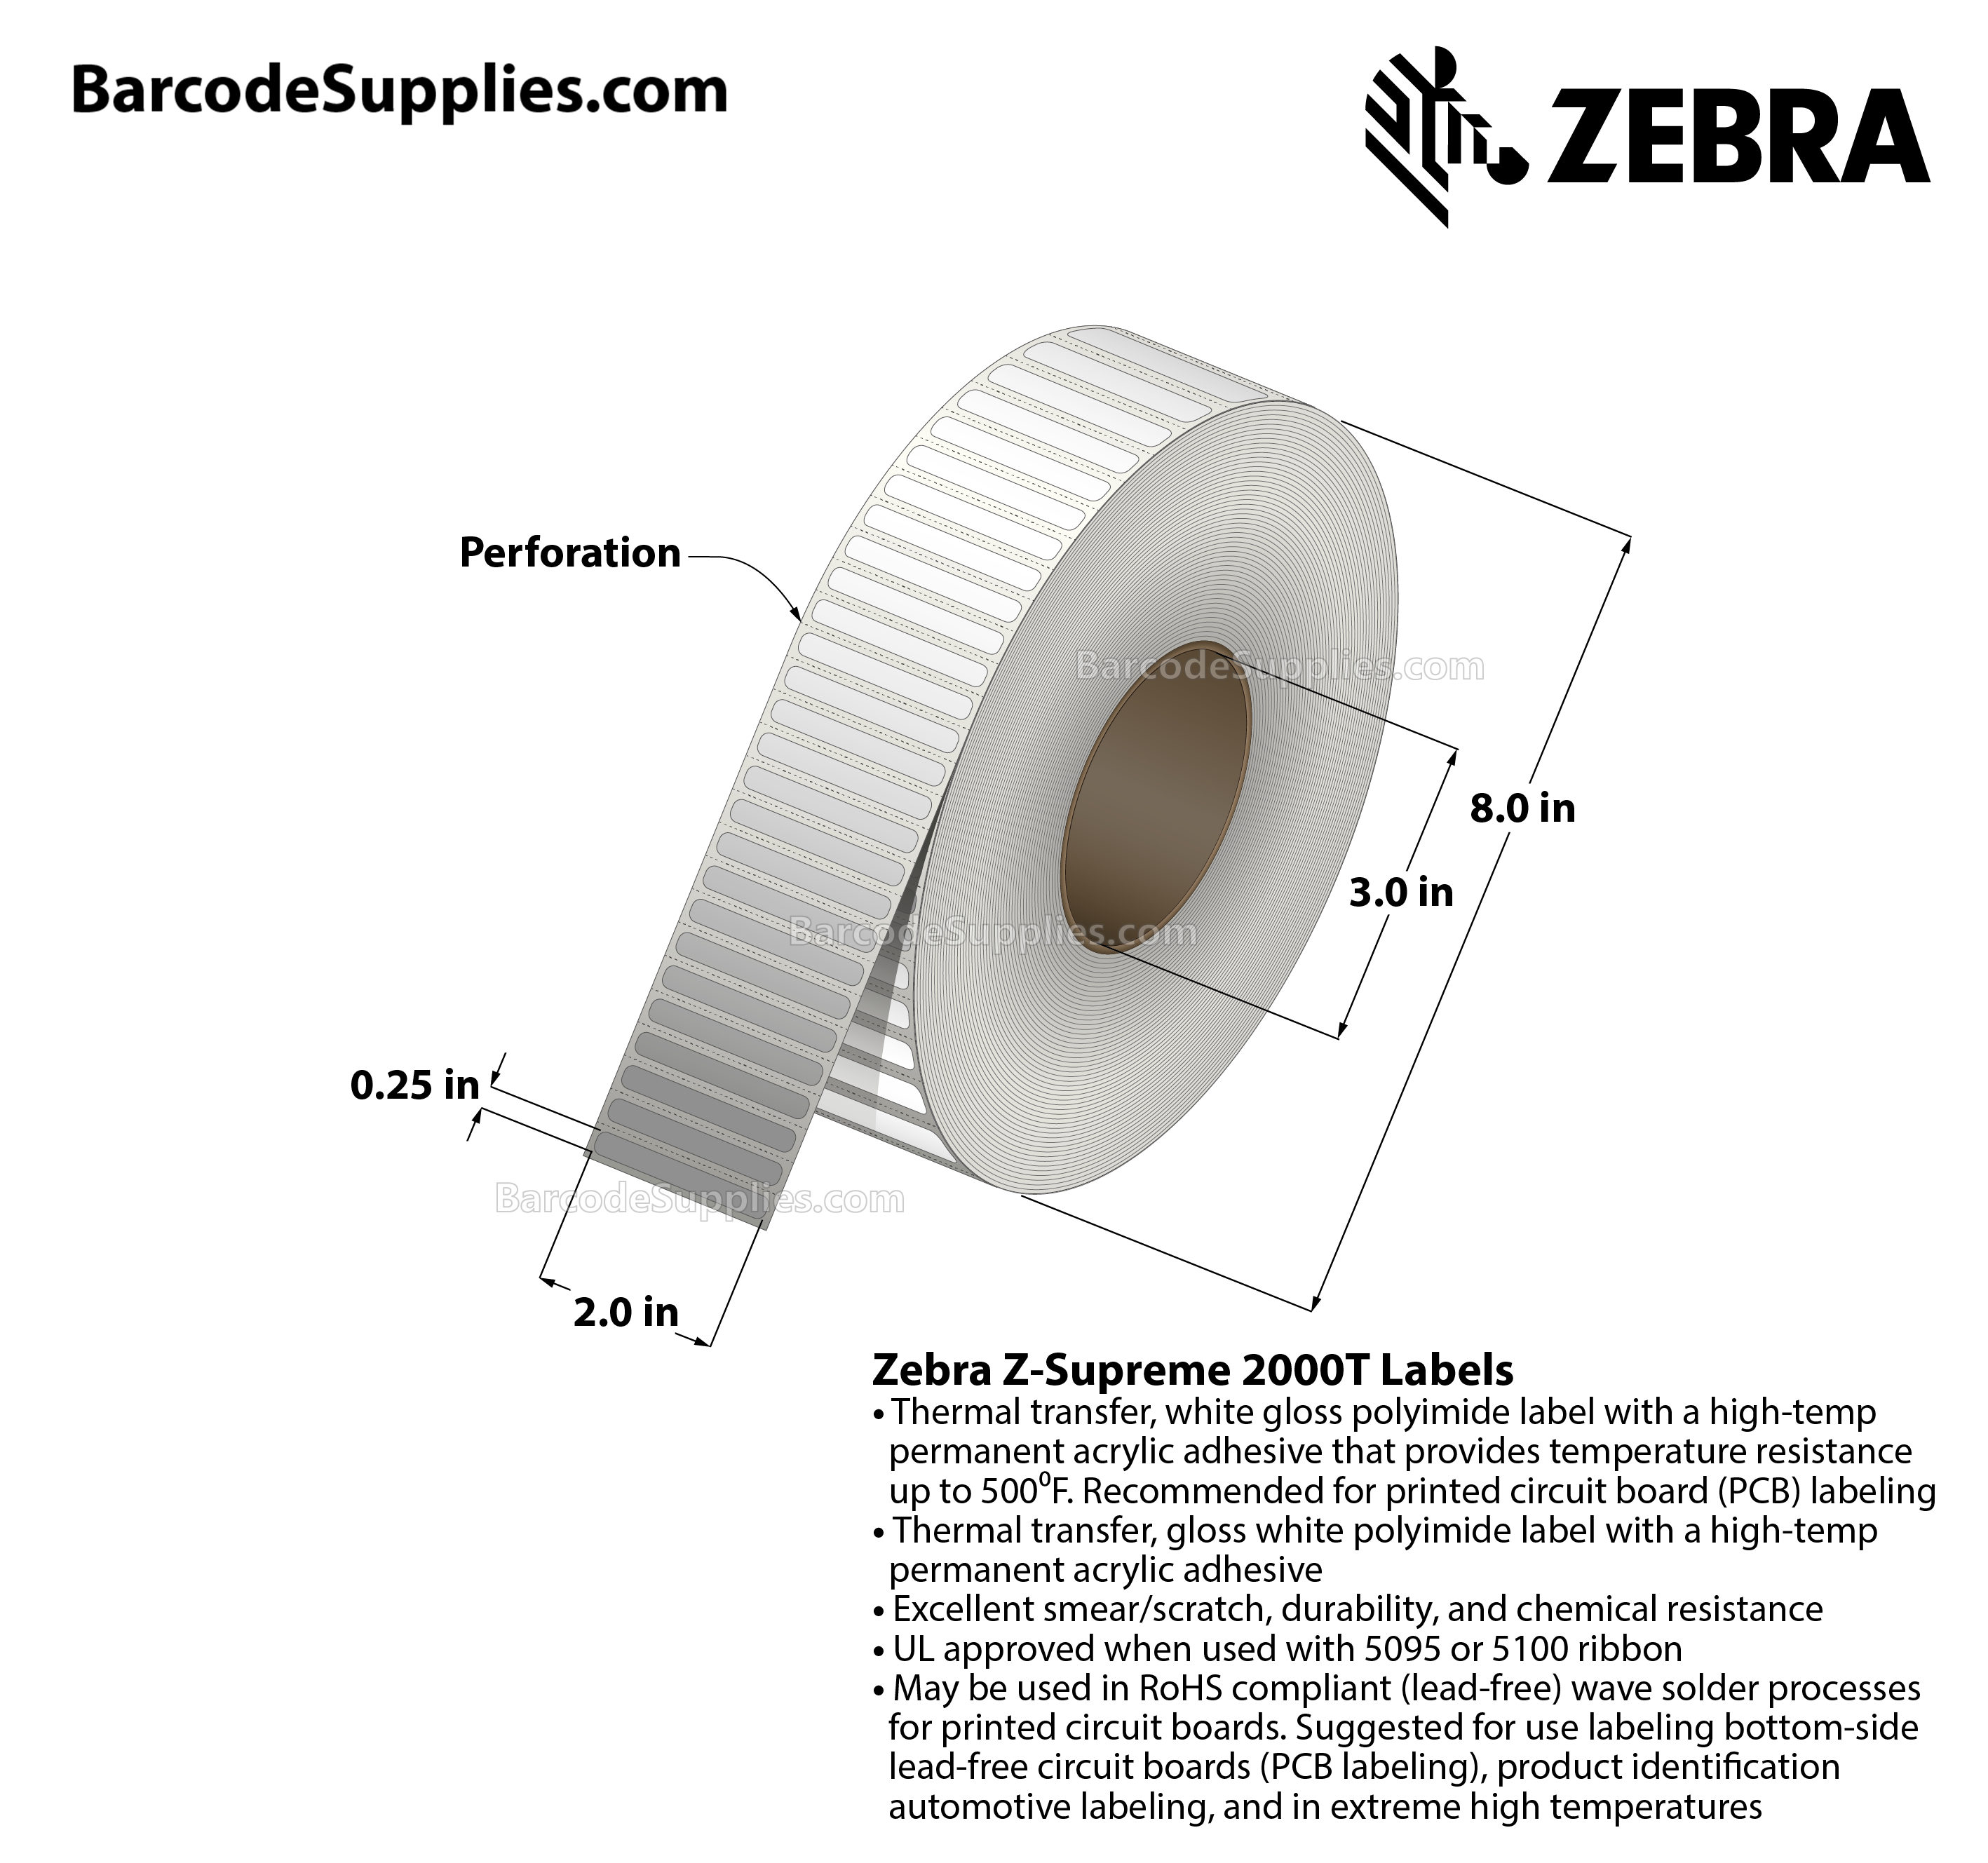 2 x 0.25 Thermal Transfer White Z-Supreme 2000T Labels With High-temp Adhesive - Perforated - 10000 Labels Per Roll - Carton Of 1 Rolls - 10000 Labels Total - MPN: 10021219